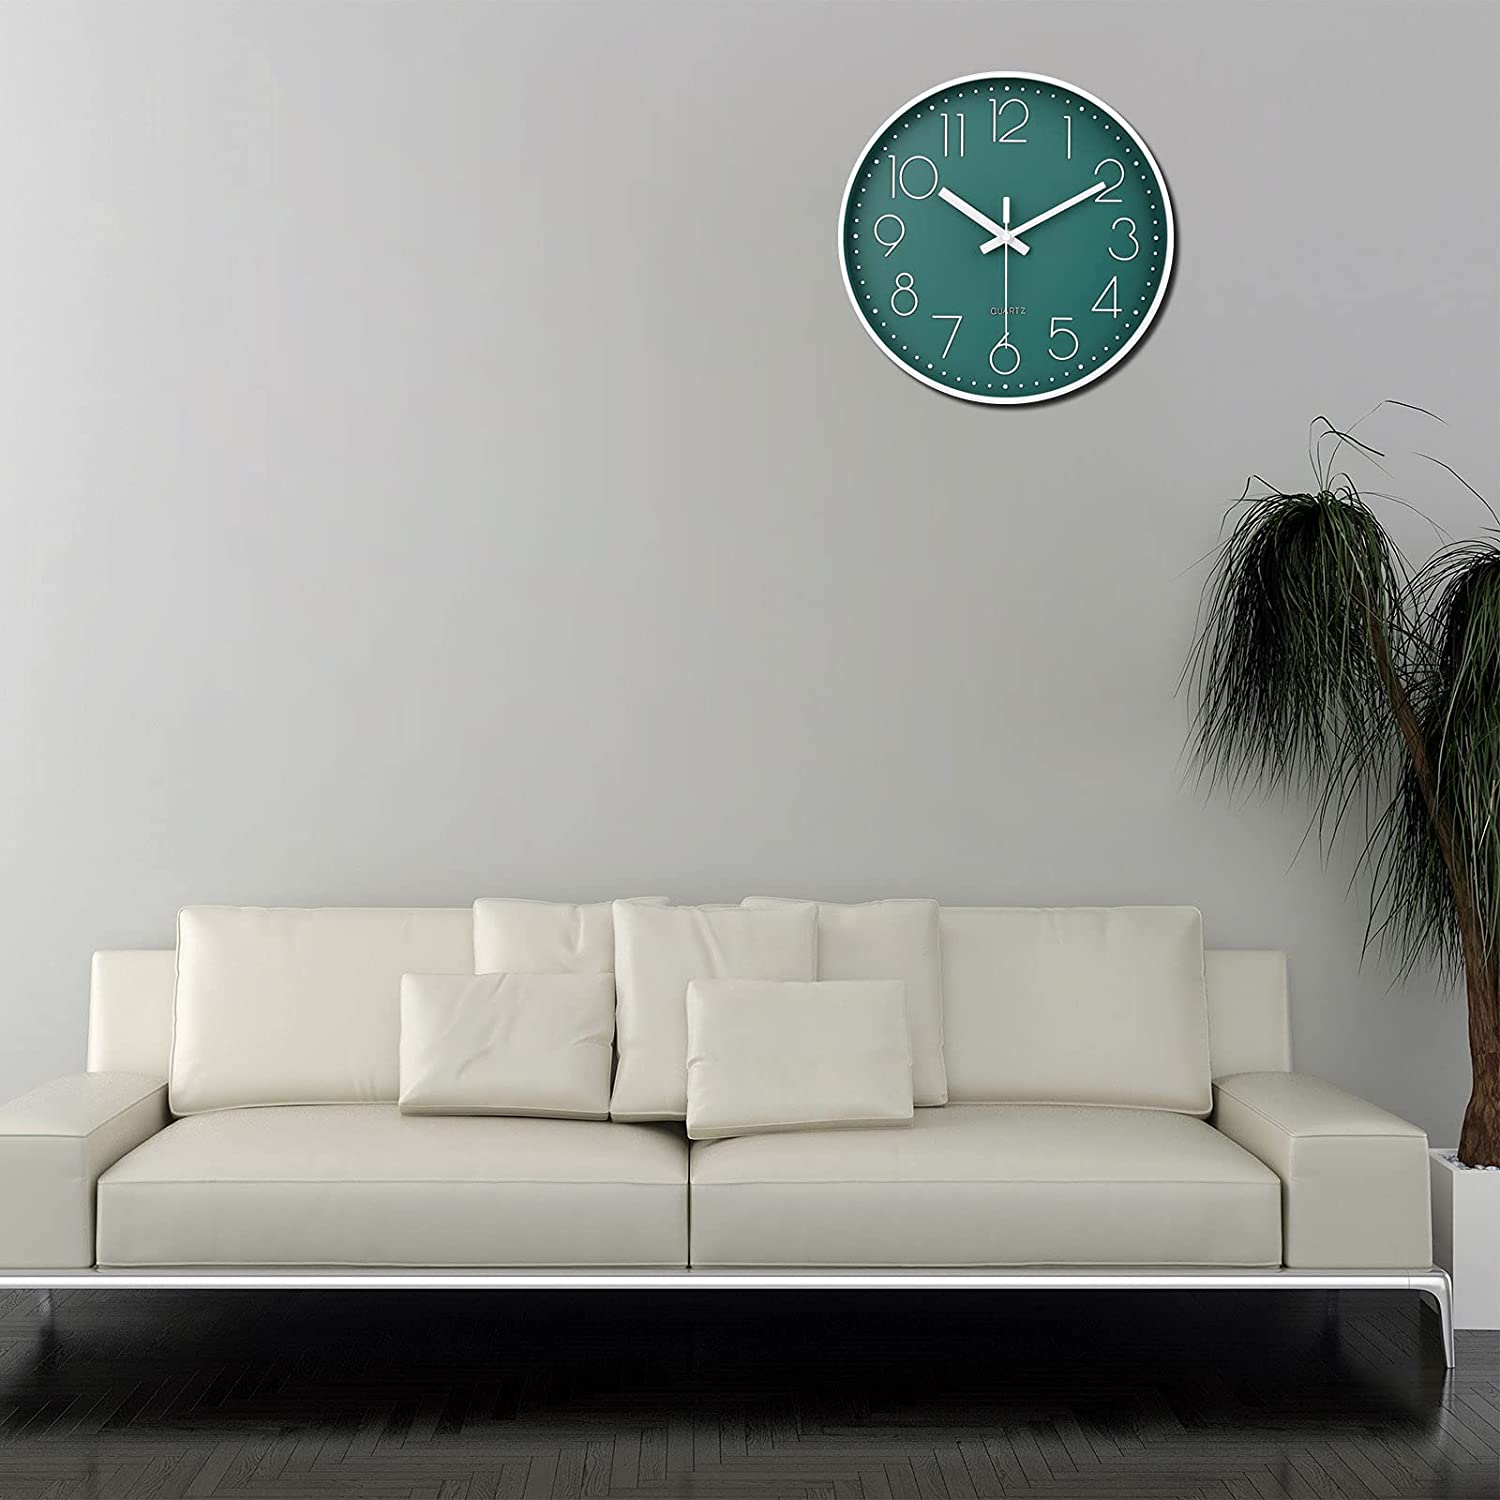 8138-12-Turquoise 12 Inch Silent Non-Ticking Battery Operated Round Wall Clock Easy to Read Clocks ( Turquoise Color )